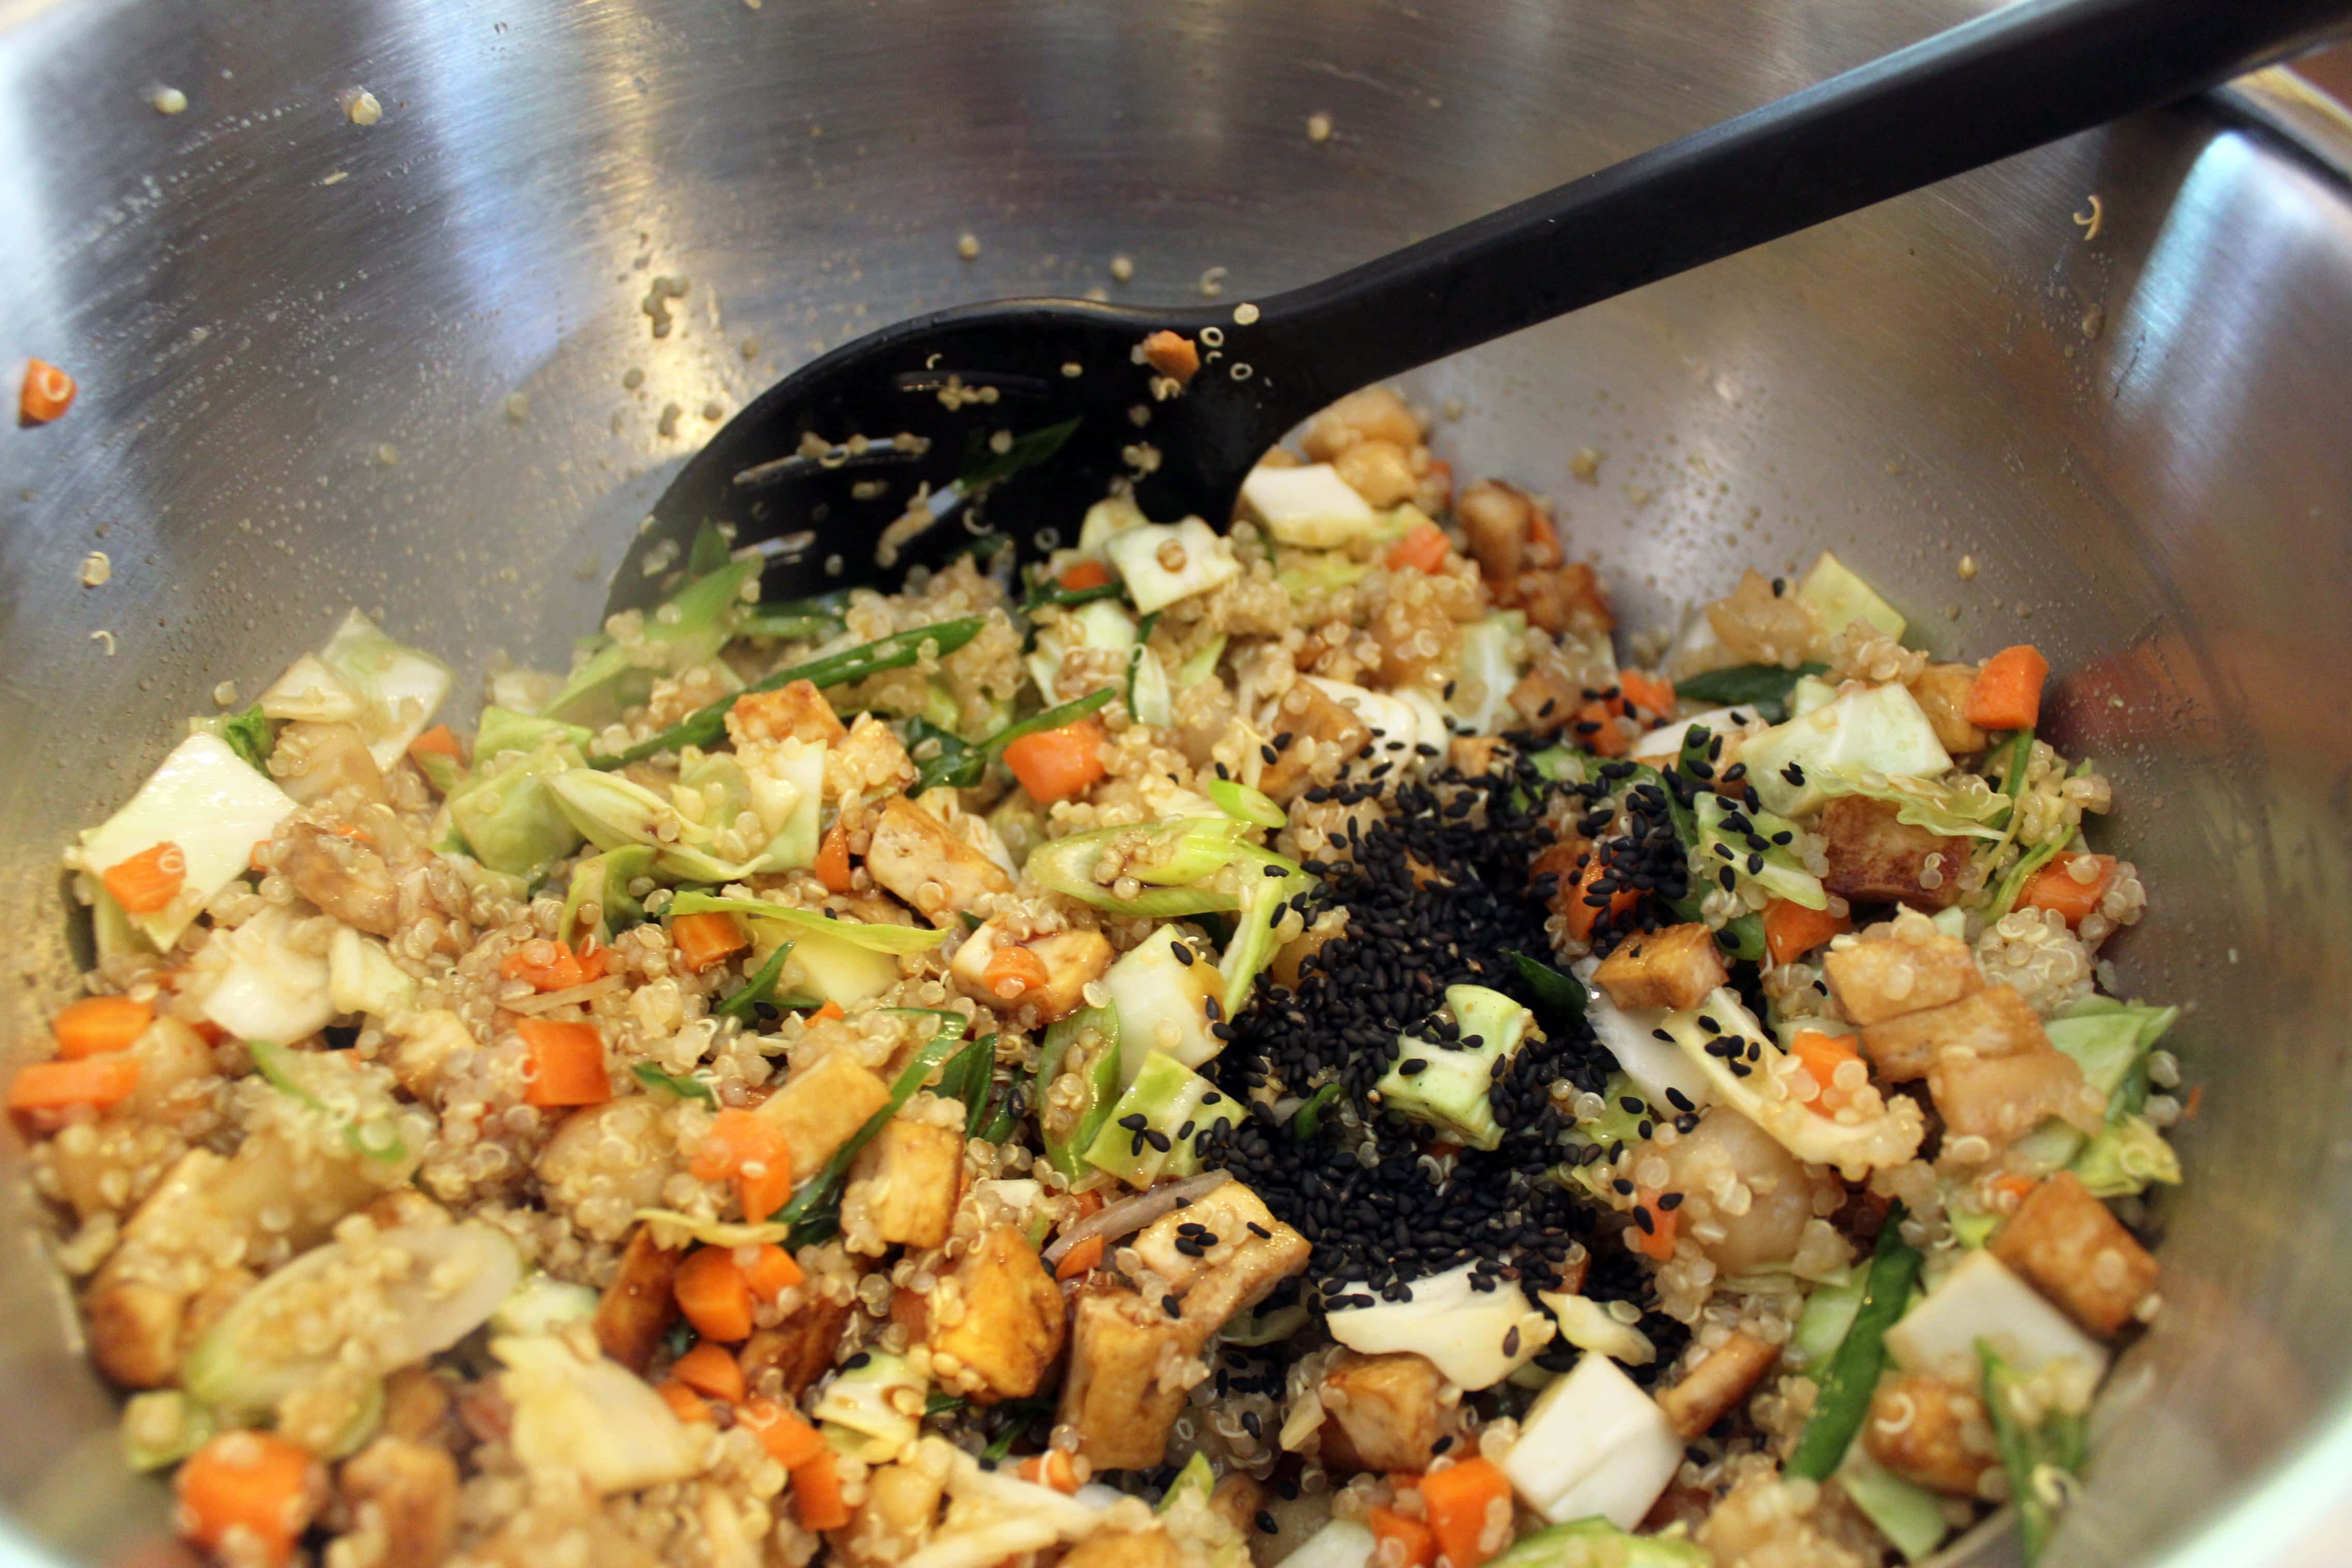 Add sesame seeds to salad and then taste